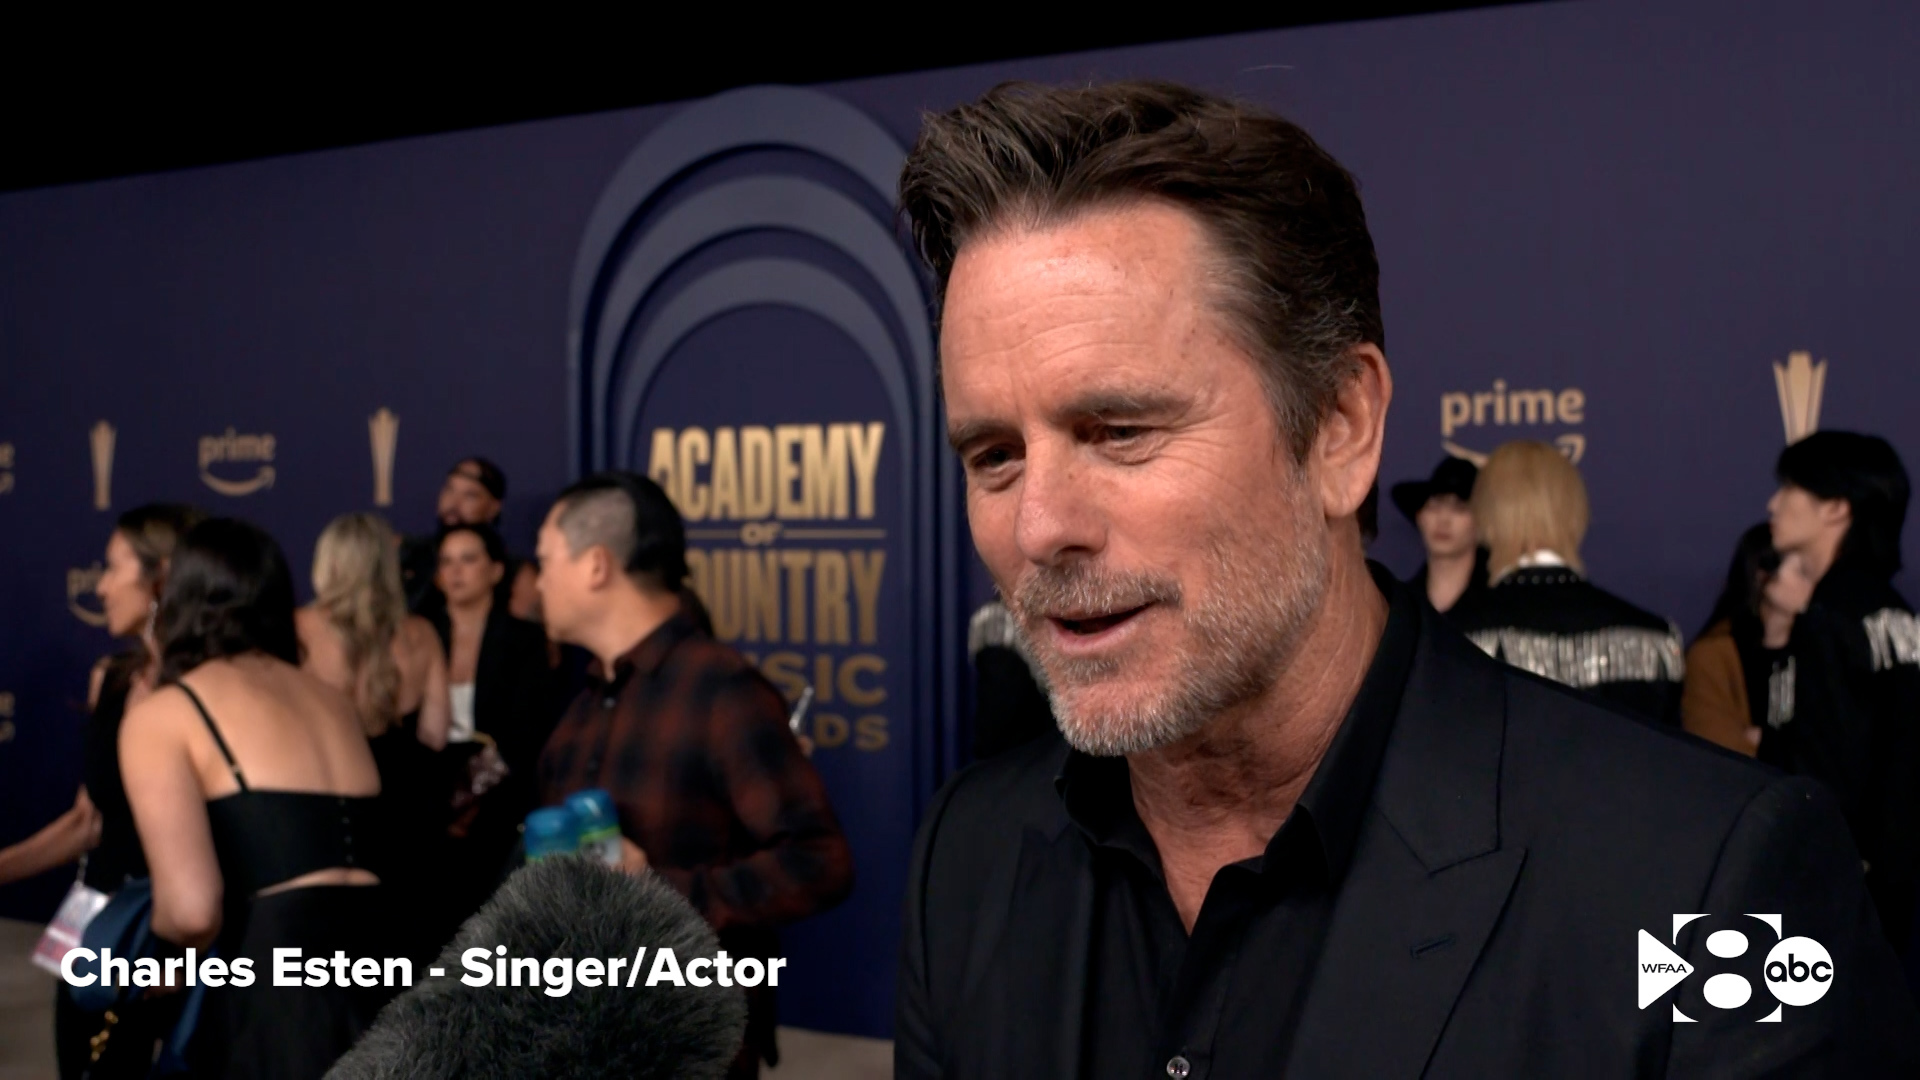 'Nashville' actor & musician Charles Esten talks to WFAA before heading into the Academy of Country Music Awards. 'Schitts Creek' star Noah Reid presented at ACM.